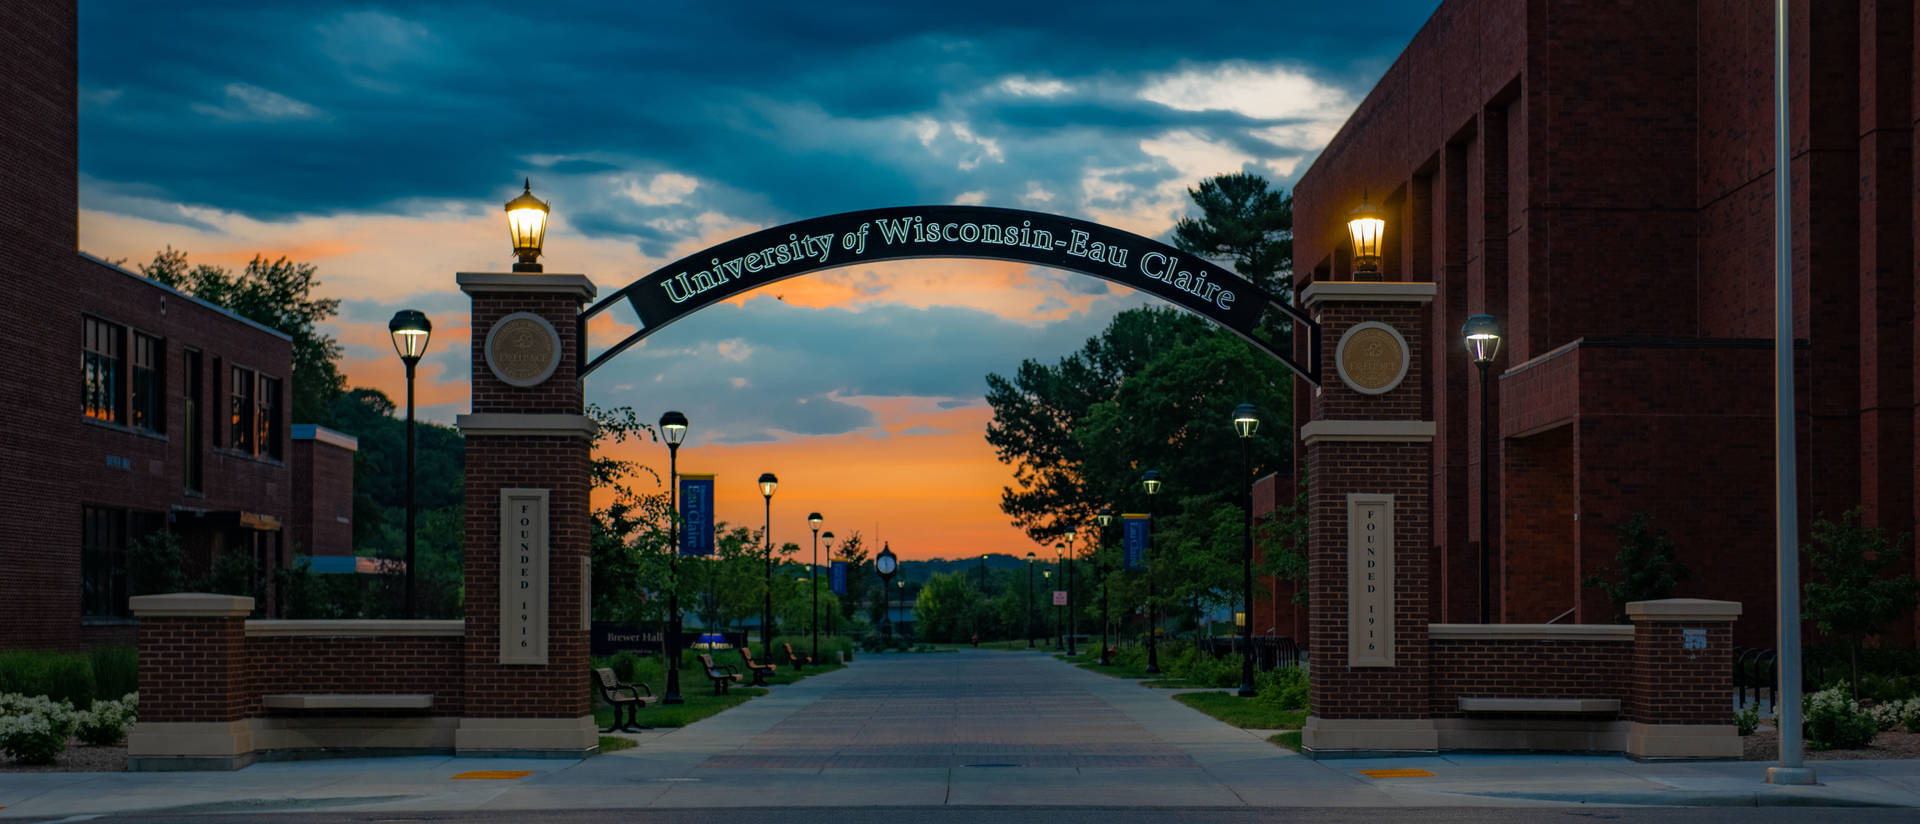 An evening picture of the UW-Eau Claire entrance gate with arch.